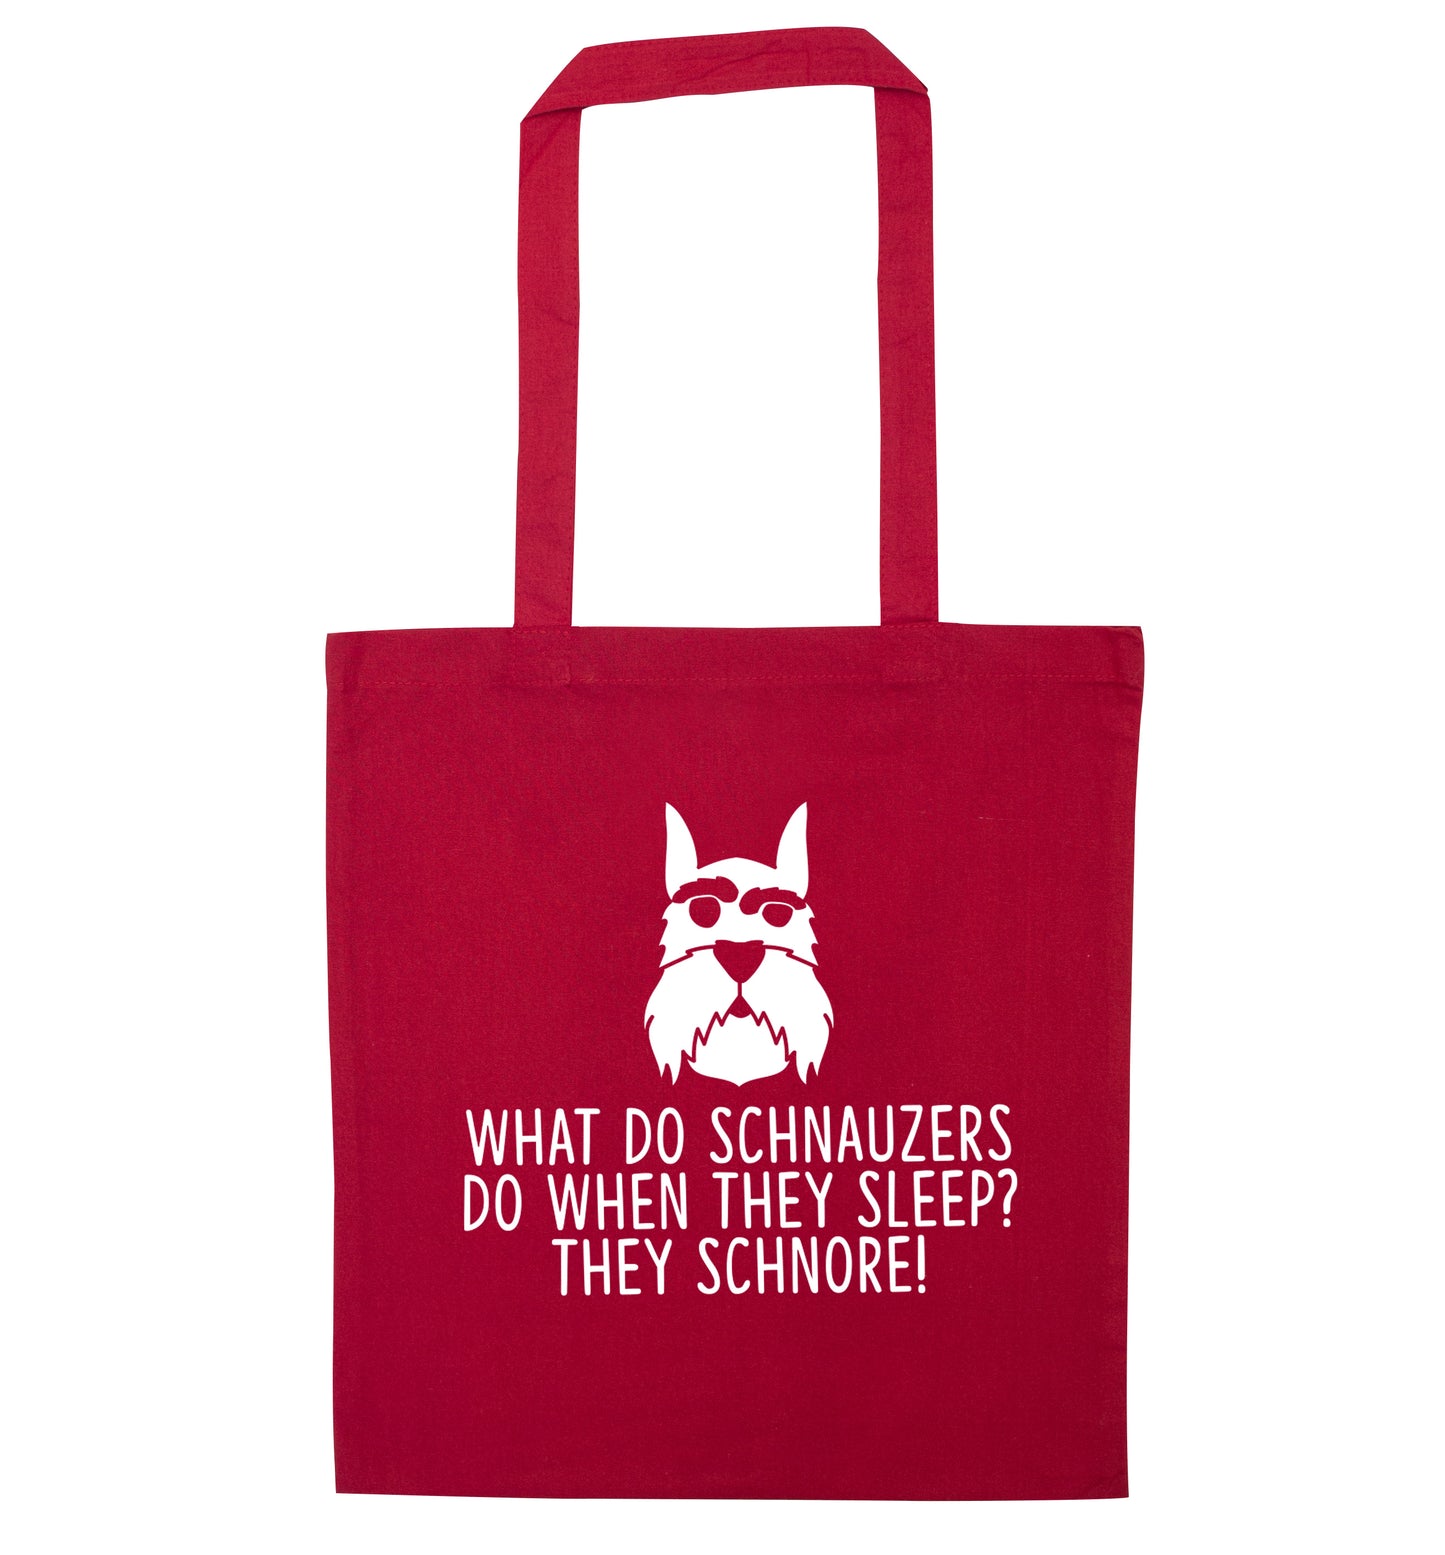 What do schnauzers do when they sleep? Schnore! red tote bag